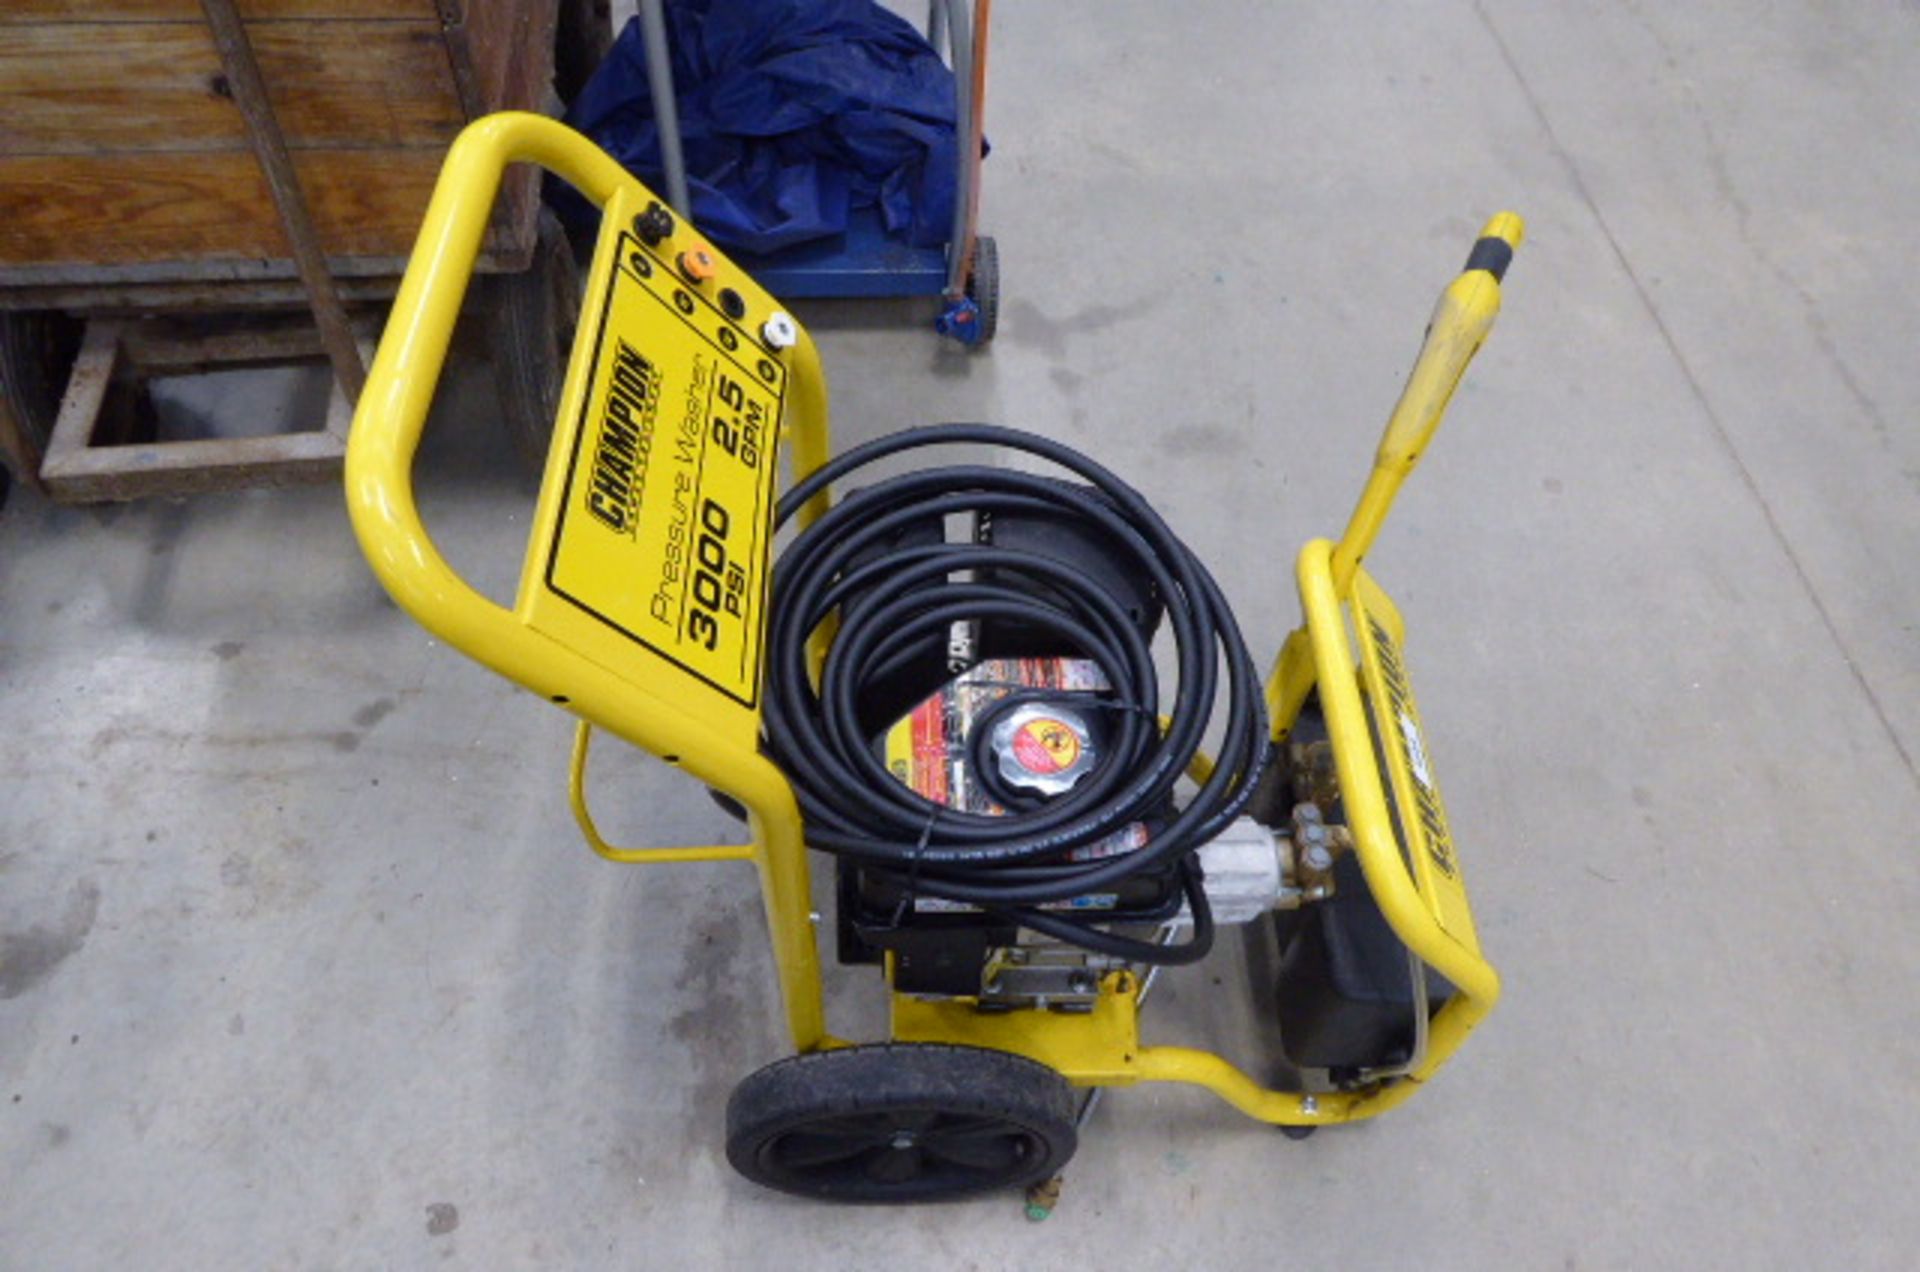 Champion petrol power pressure washer - Image 2 of 2